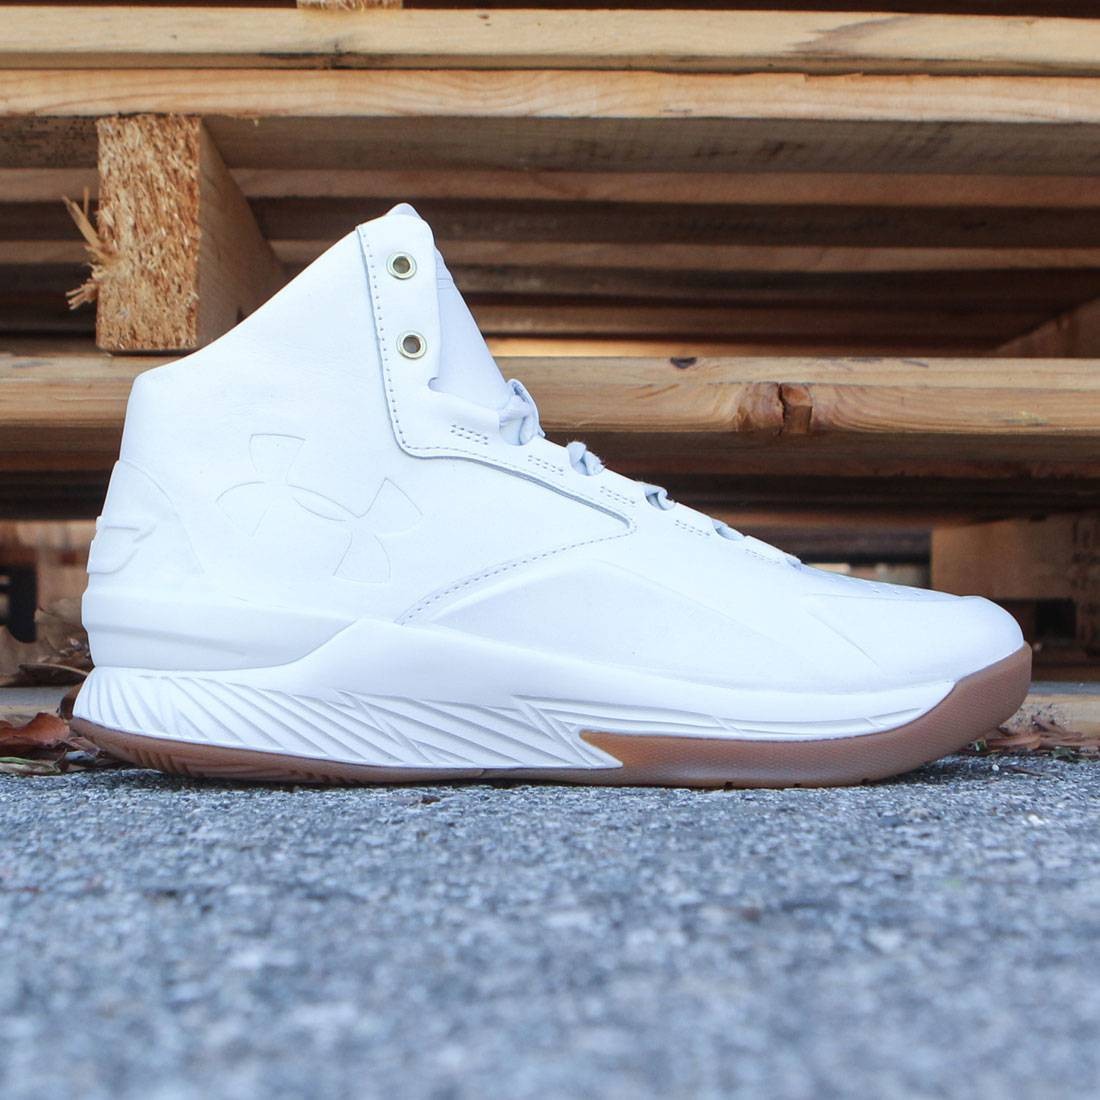 Under Armour x Steph Curry Men Curry 1 Leather - Curry Lux Pack white stone